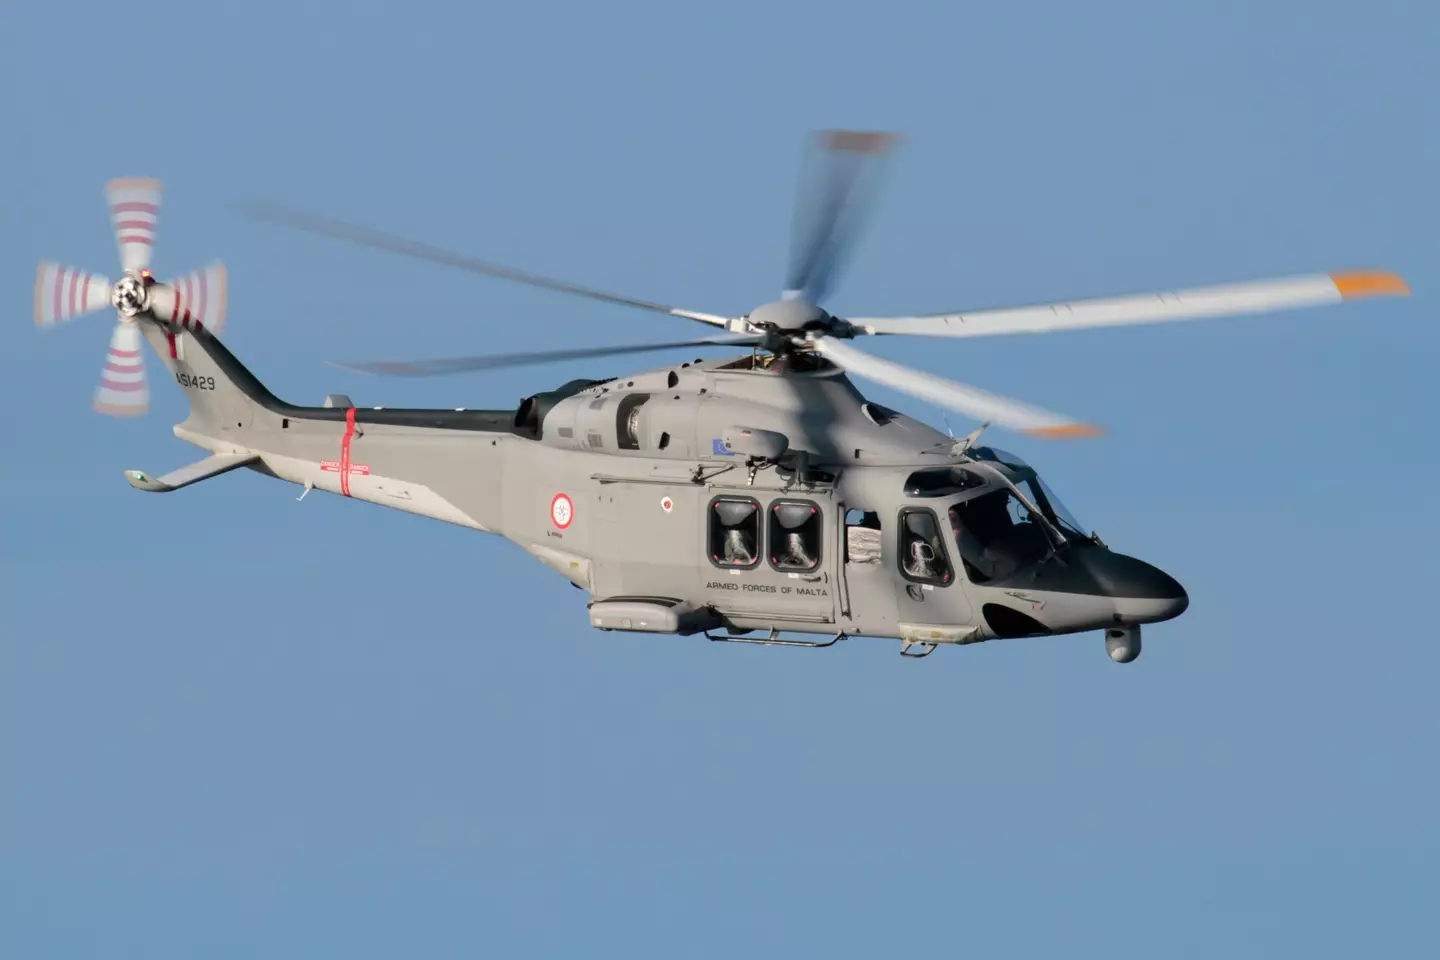 An AW139 Helicopter, the kind which drew the penis in the sky.